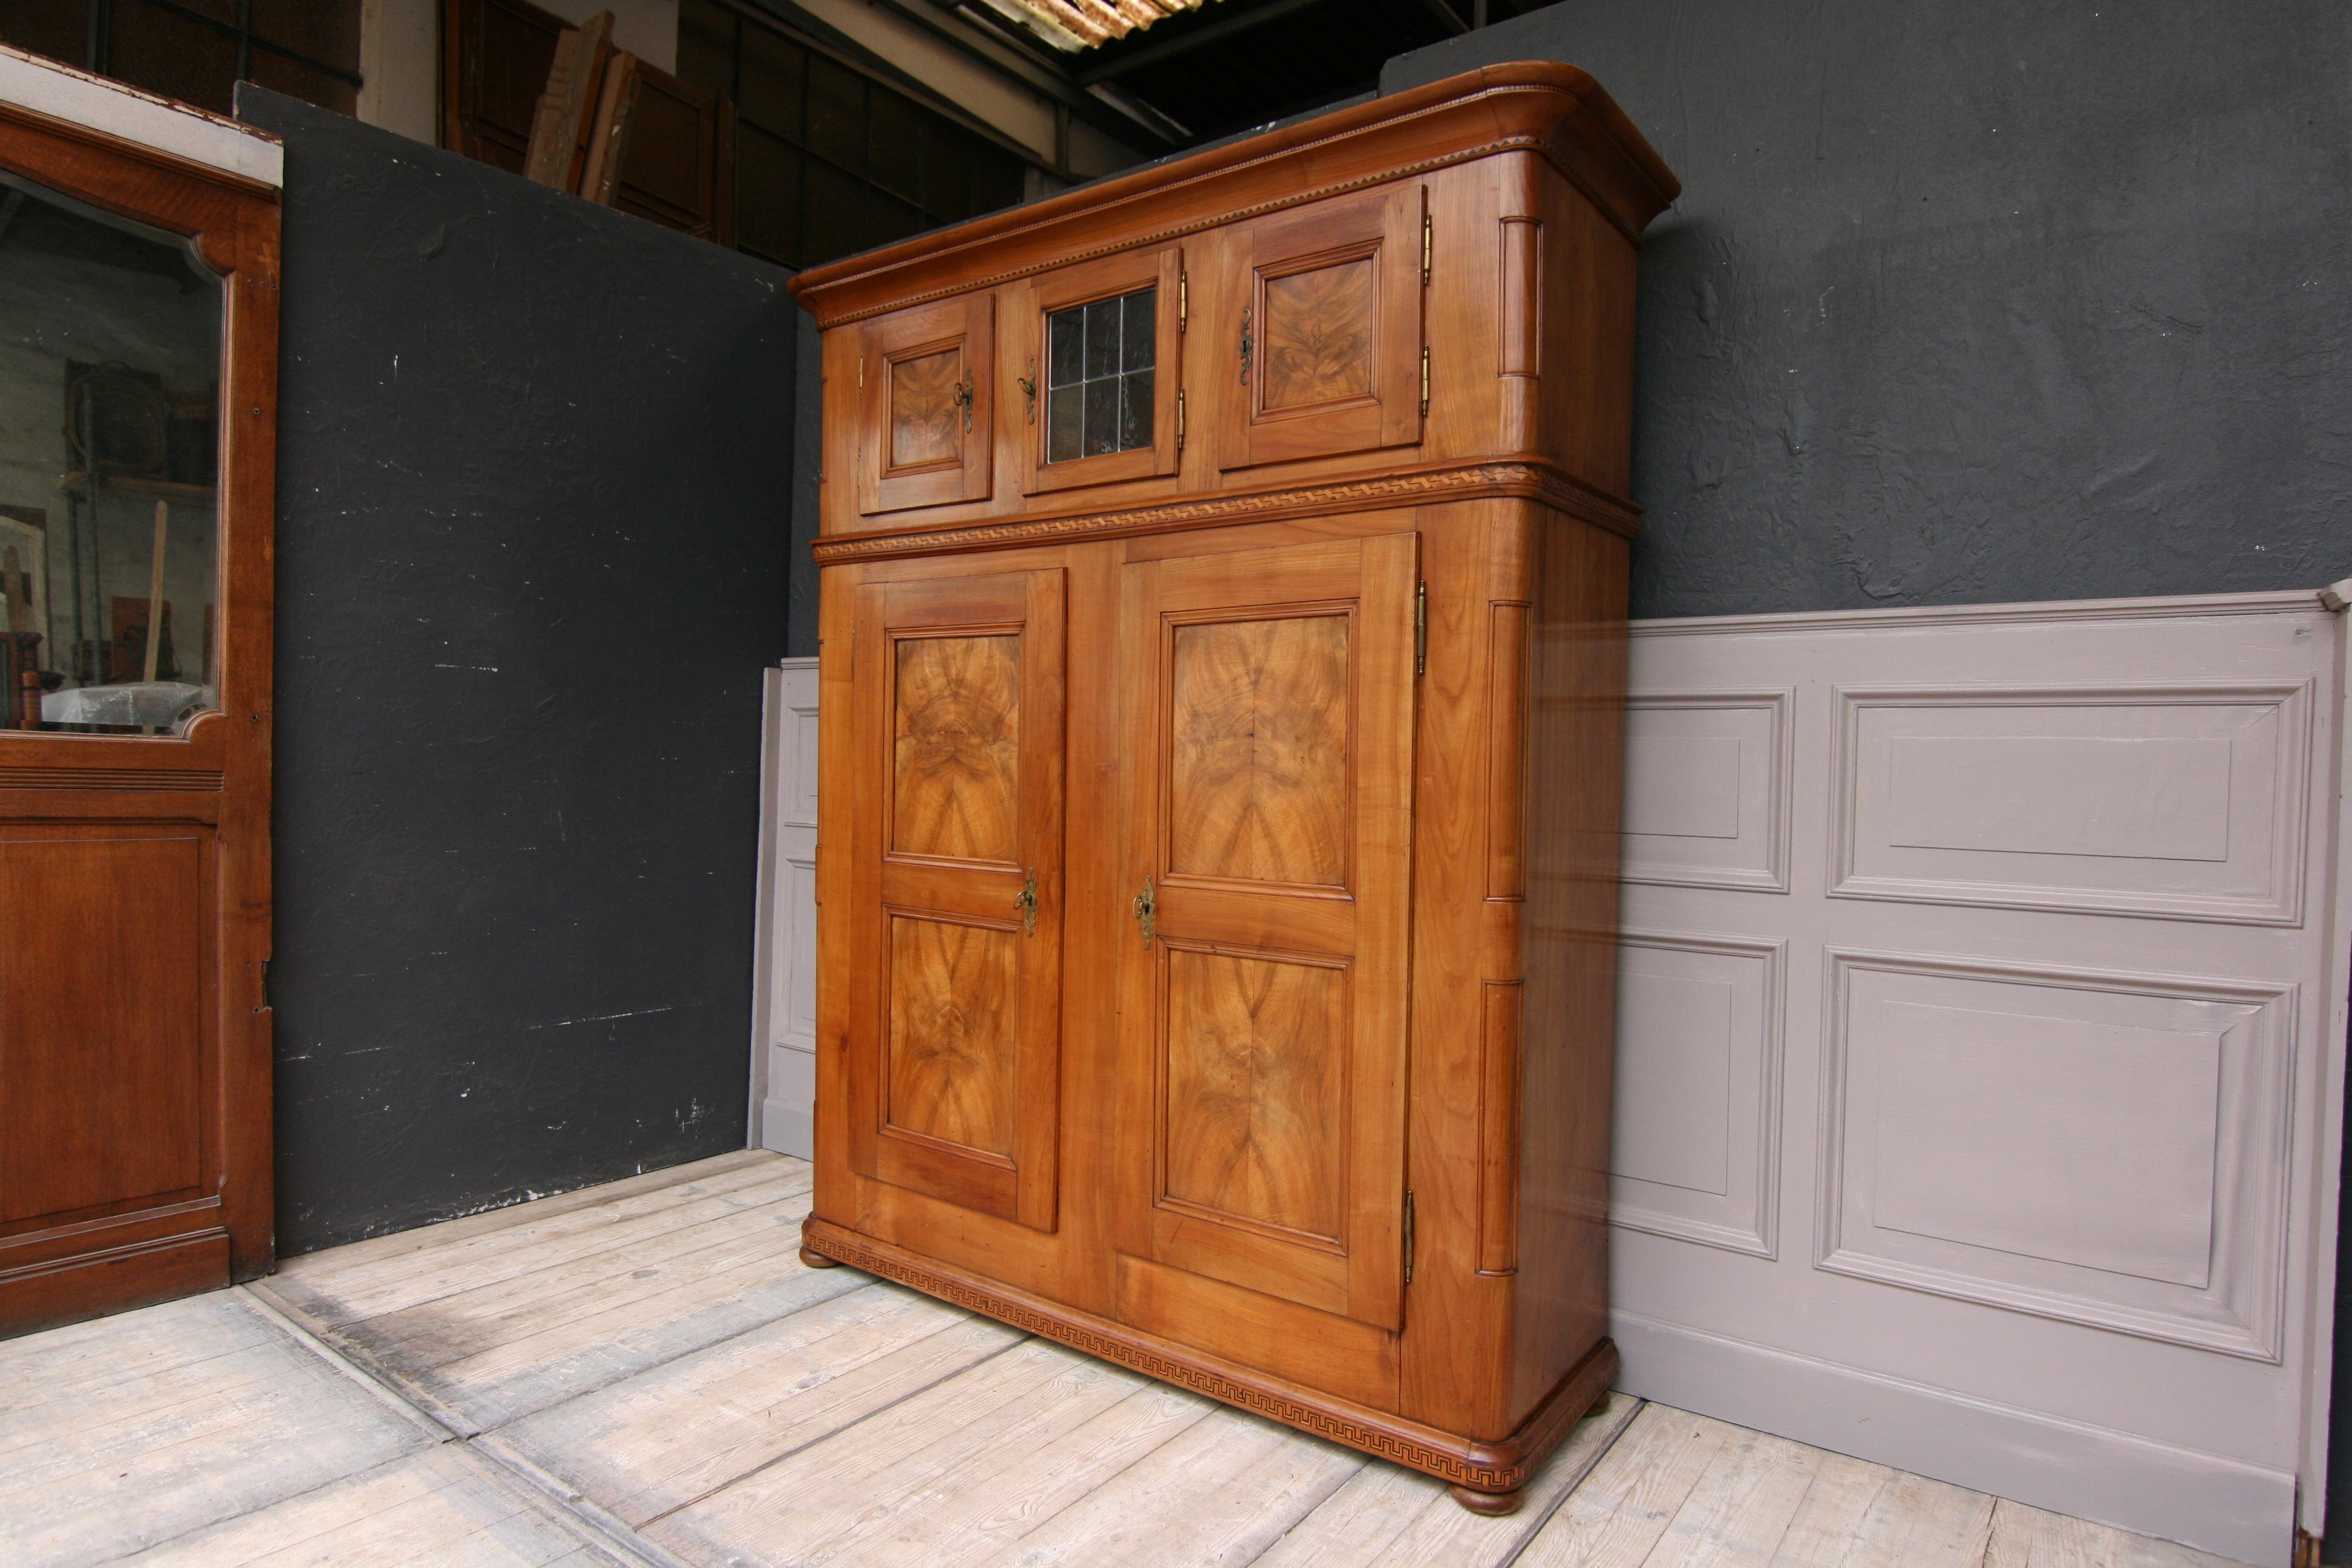 Early 19th Century Swiss Cupboard made of Cherry Wood with Marquetry (Marketerie)